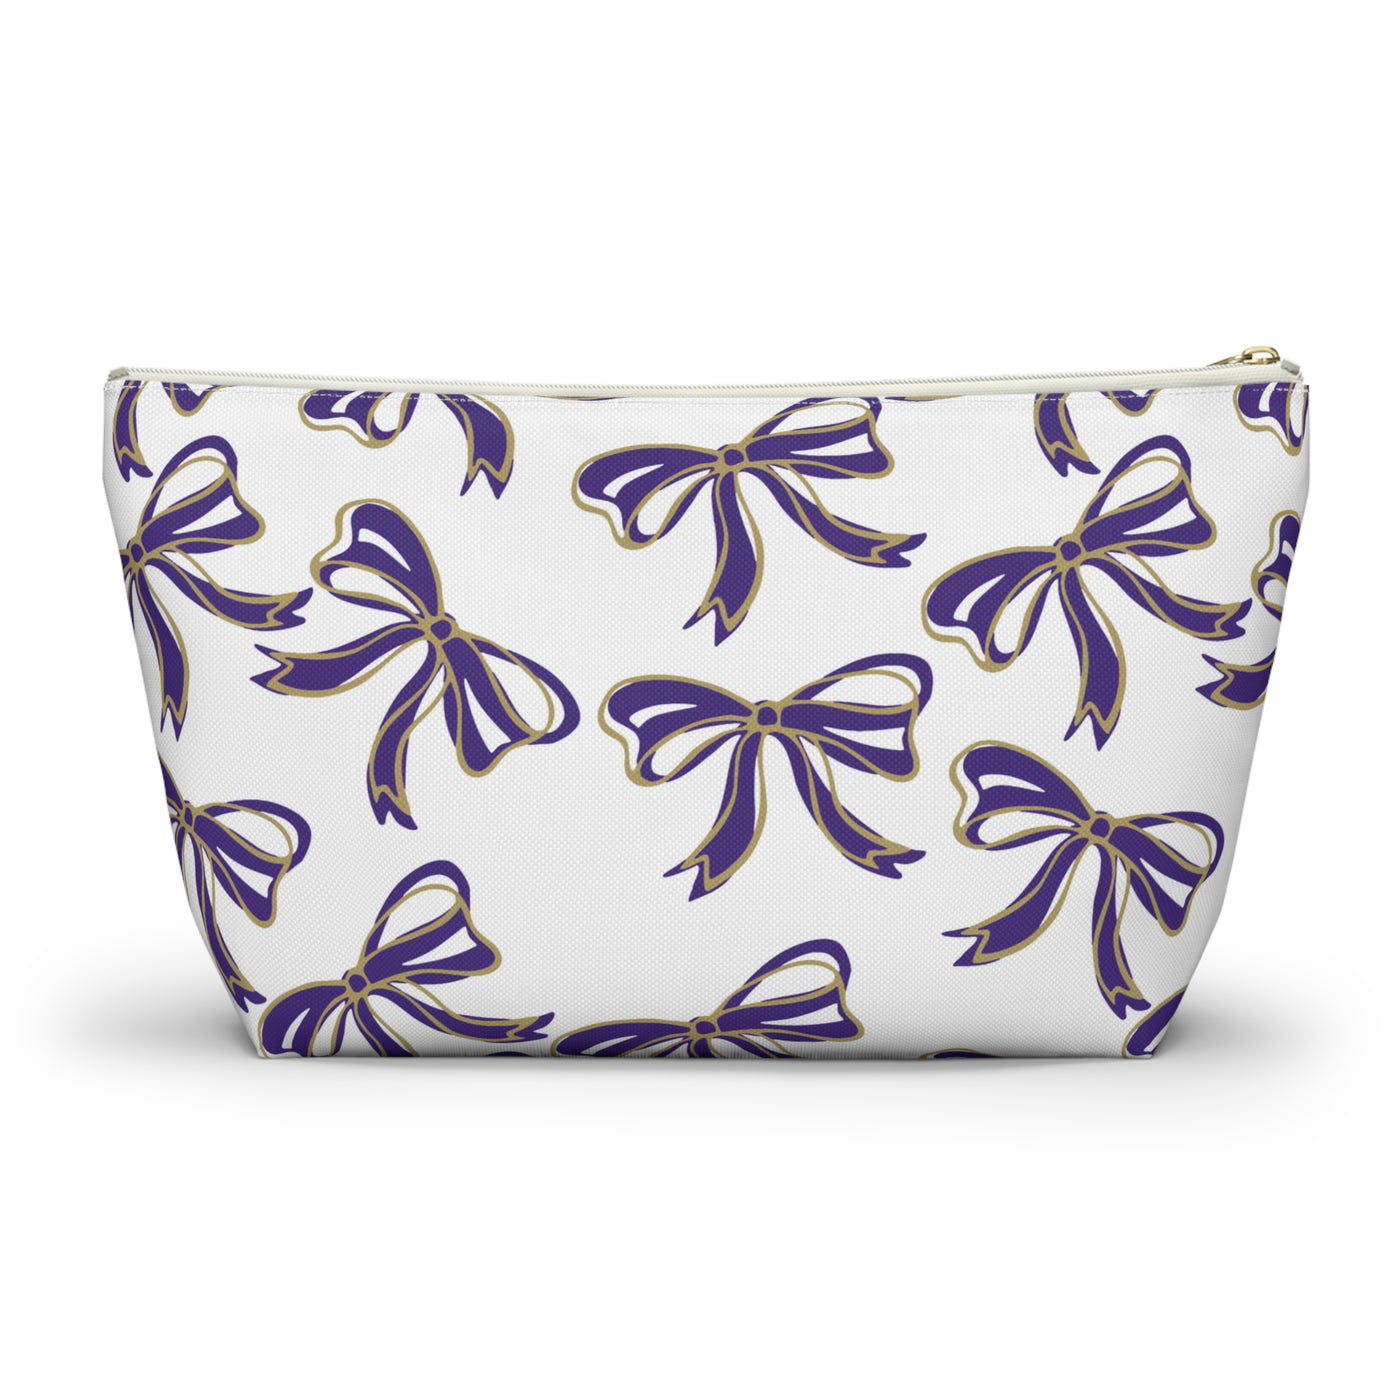 Trendy Bow Makeup Bag - Graduation Gift, Bed Party Gift, Acceptance Gift, College Gift, Purple and Gold, JMU Dukes, James Madison